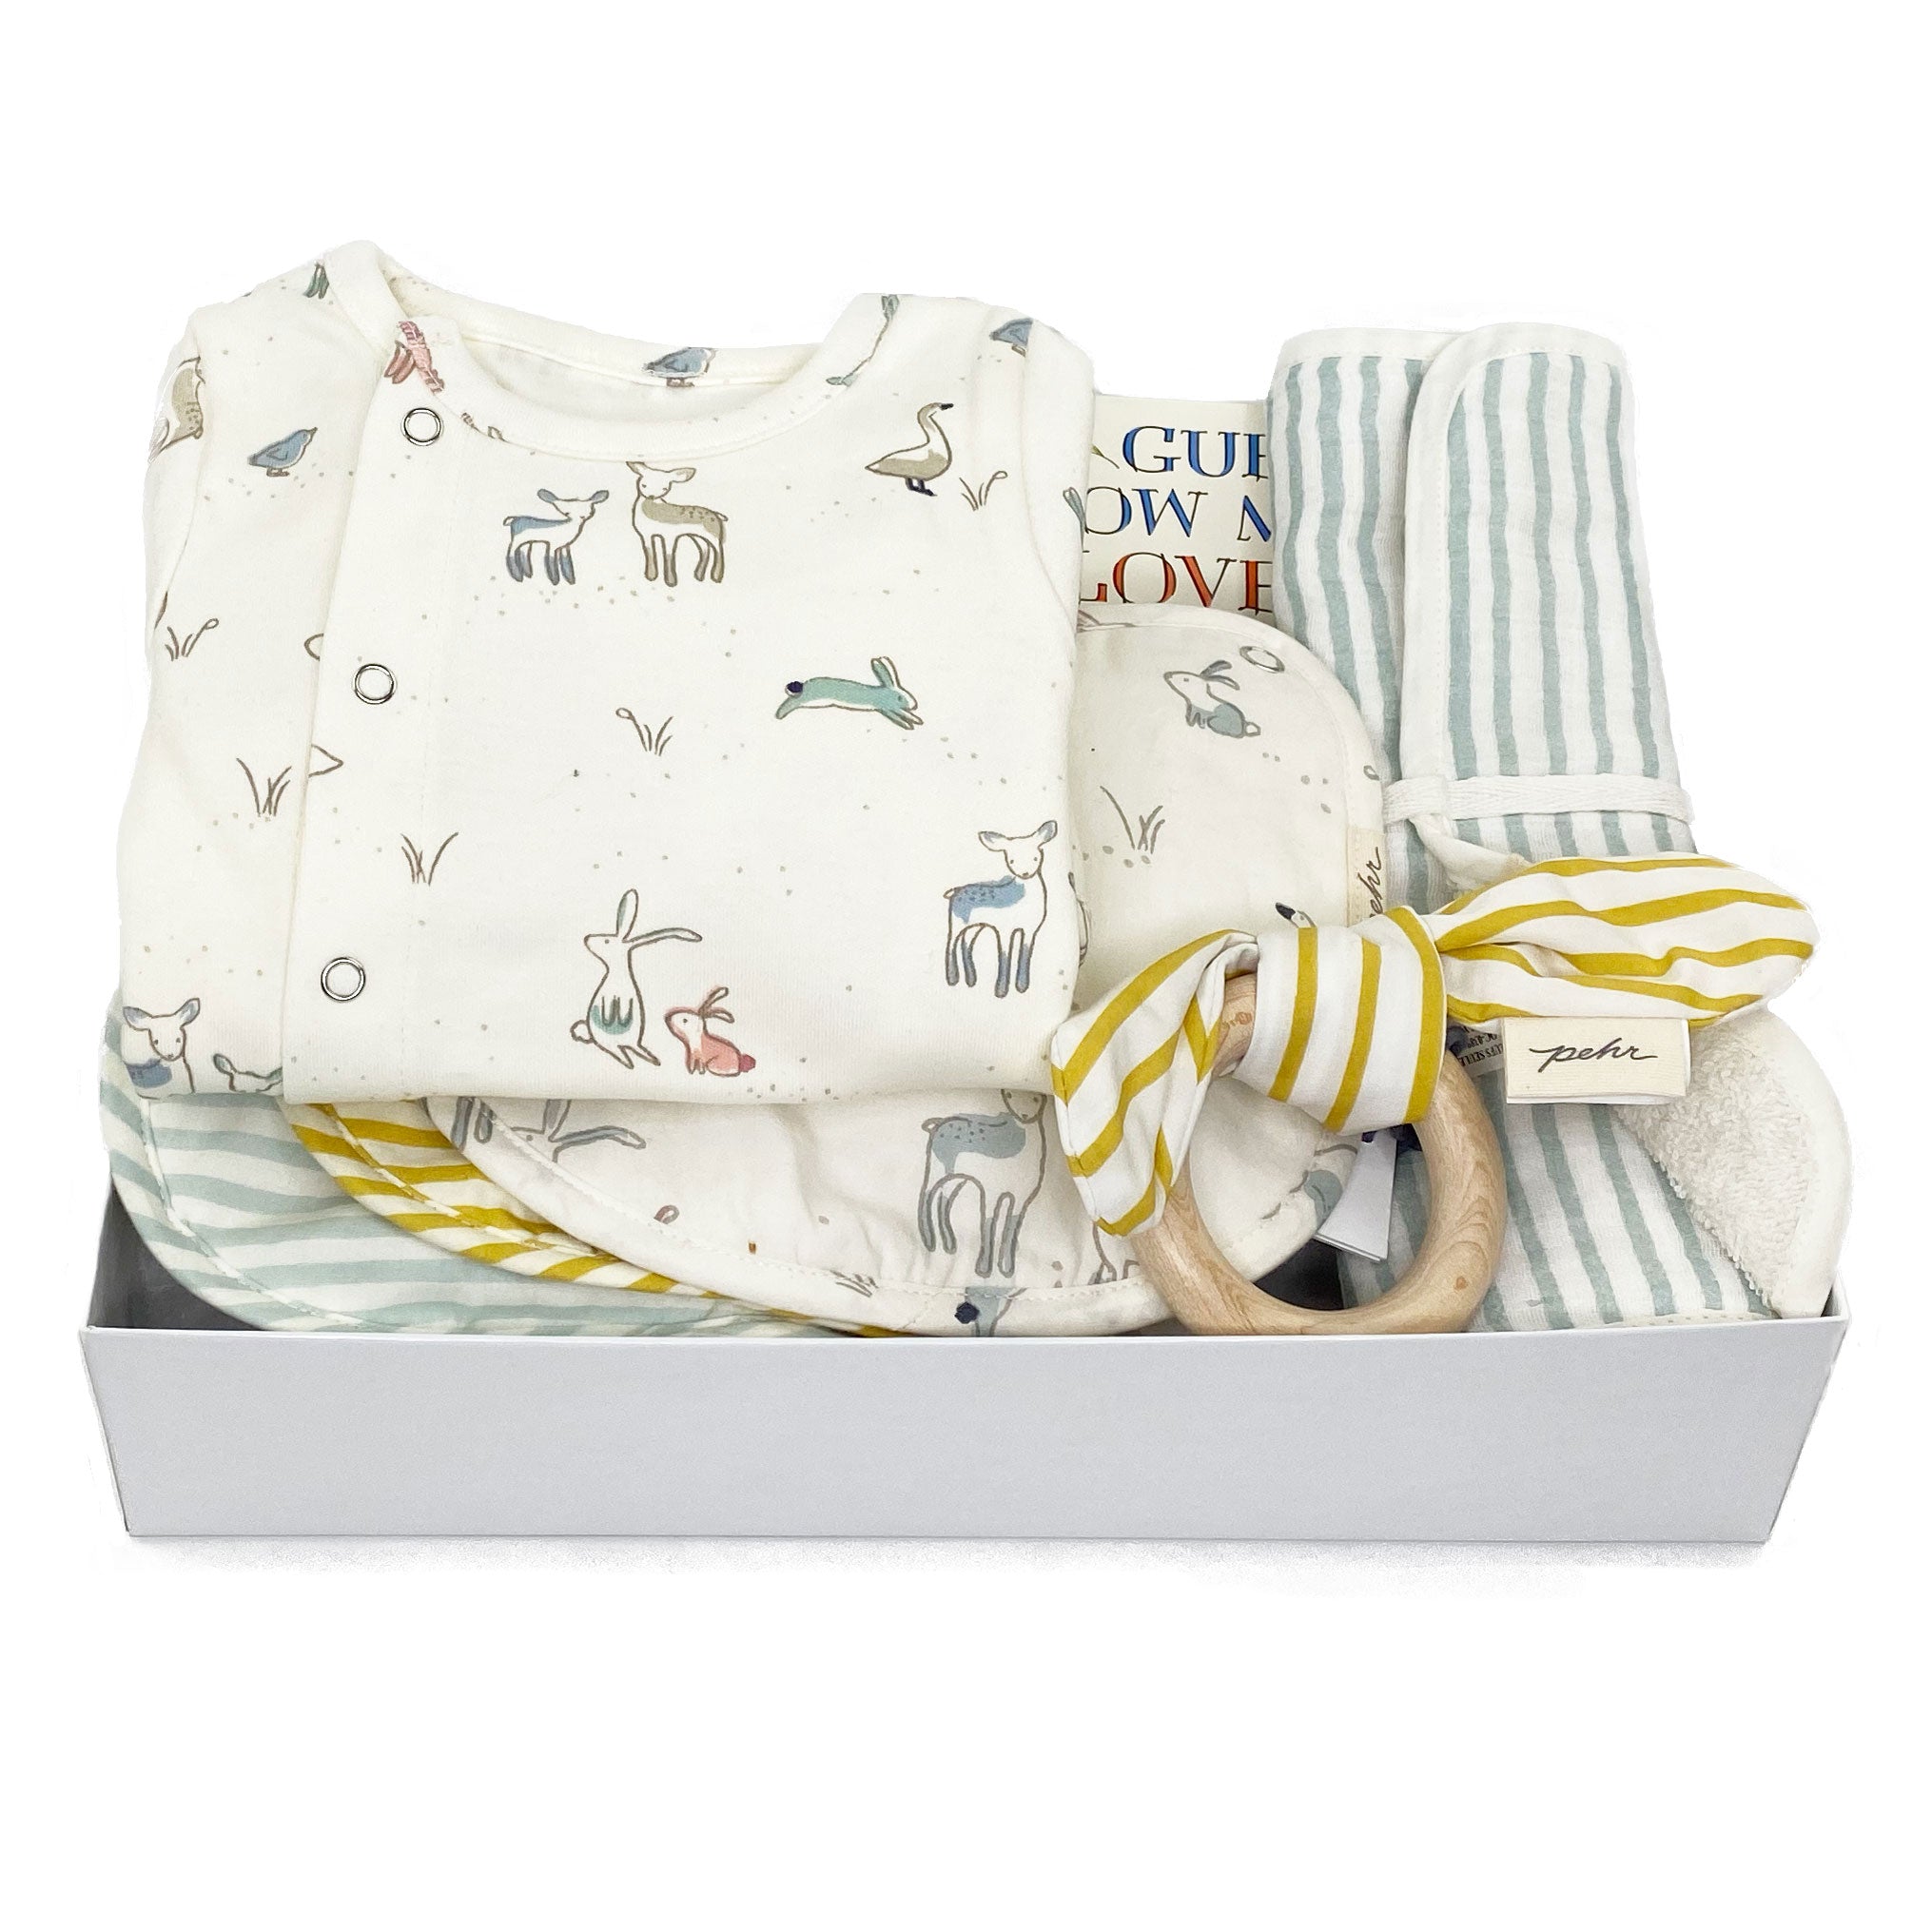 Magic Forest Baby Gift Box featuring organic cotton products by Pehr Designs at Bonjour Baby Baskets